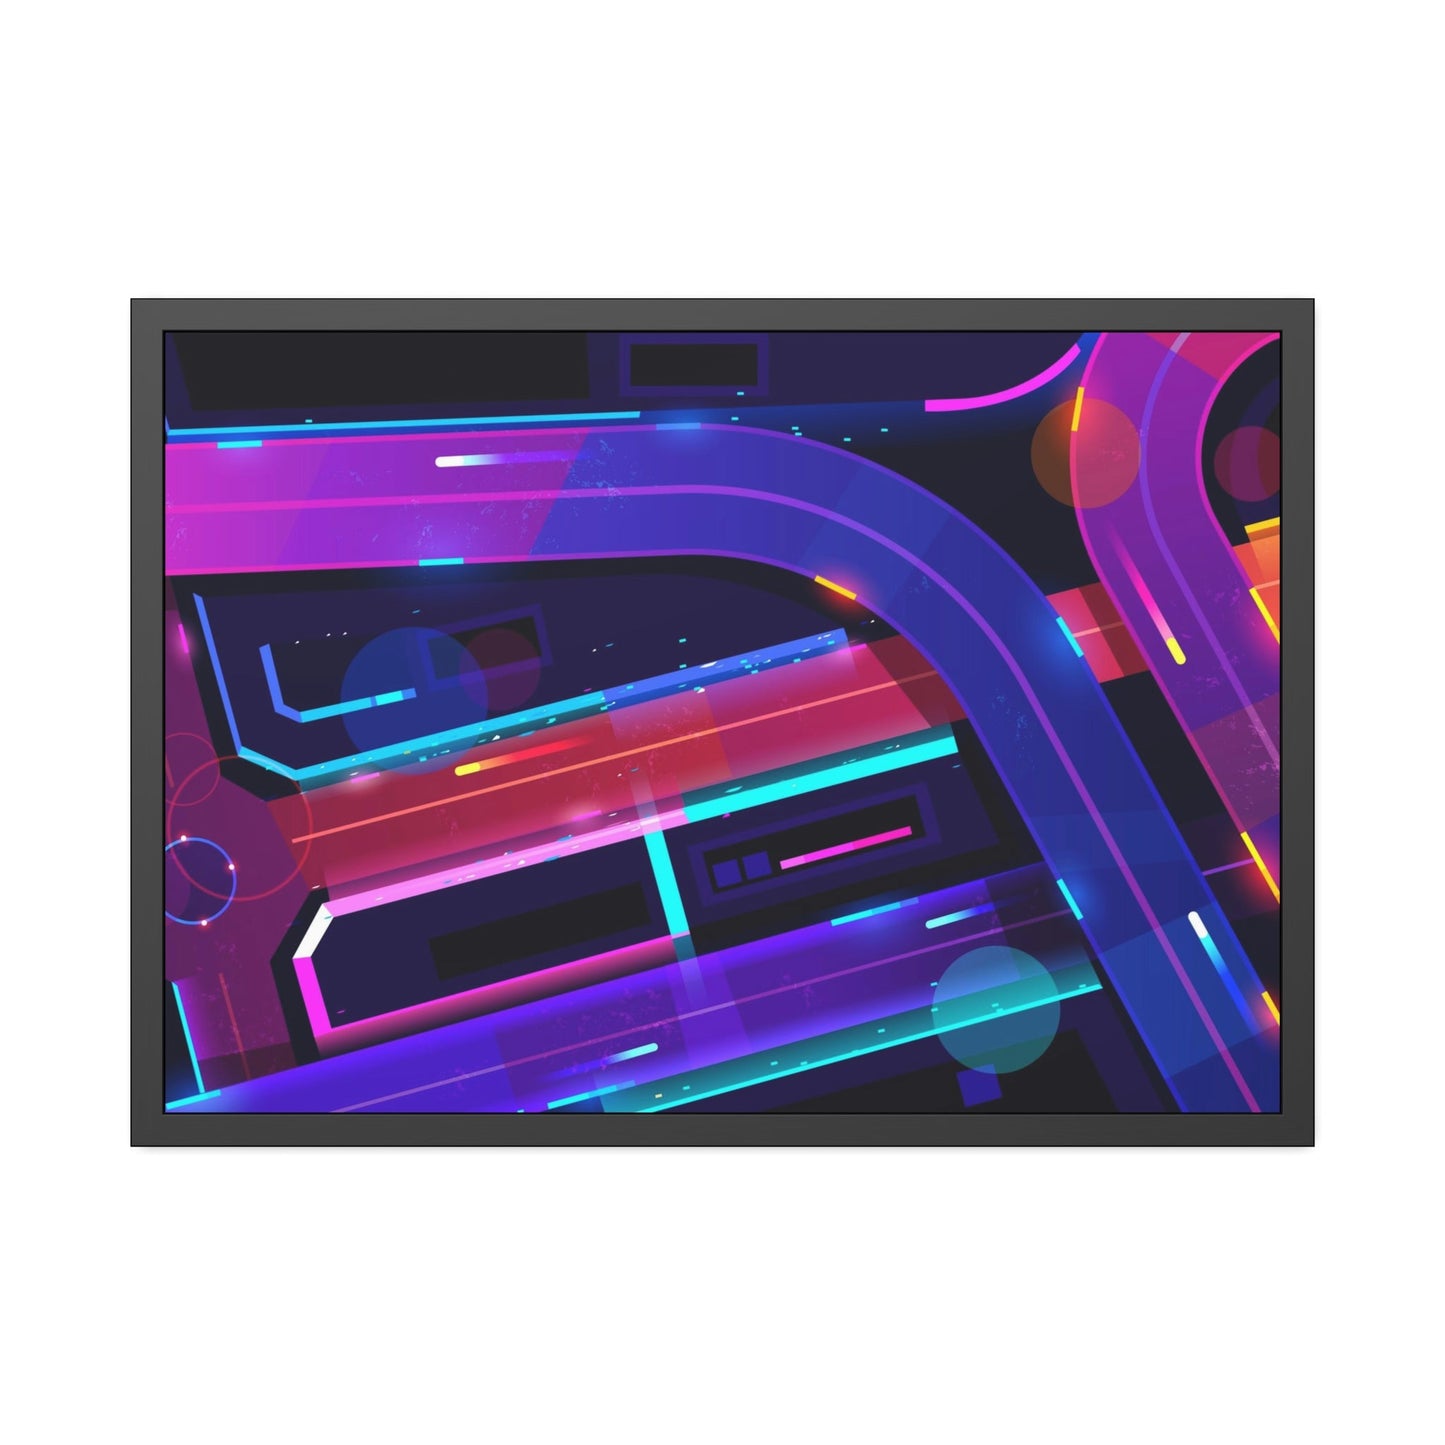 Neon Fantasia: Captivating Framed Poster Art on Premium Canvas for Wall Decor